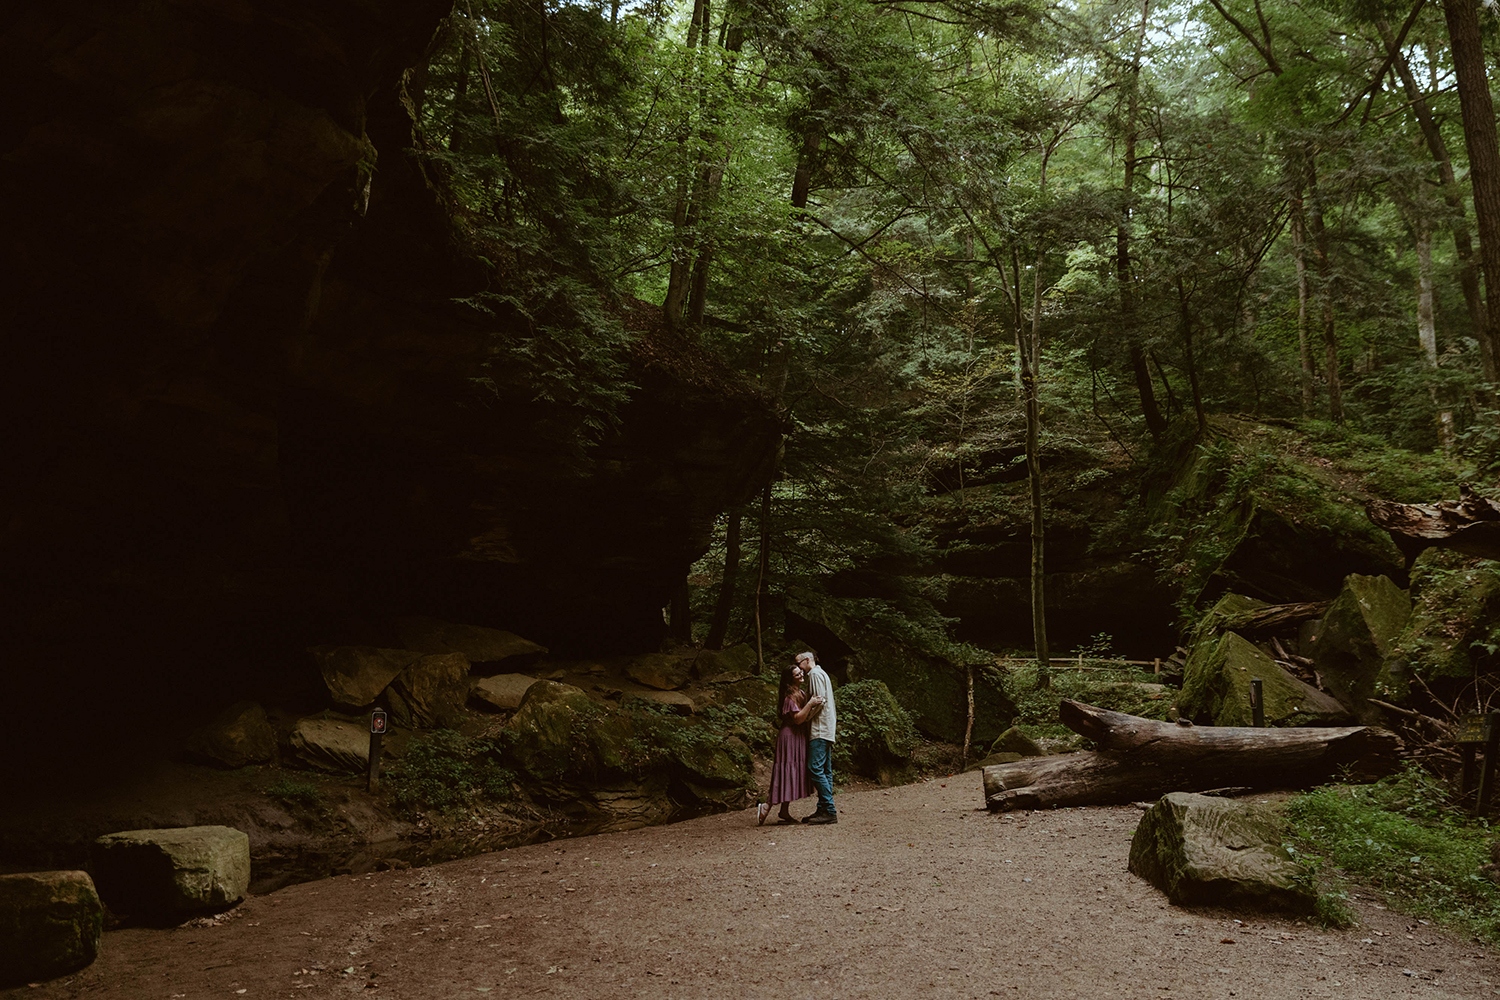 Couple gets engagement photos taken at Turkey Run State Park in Indiana.